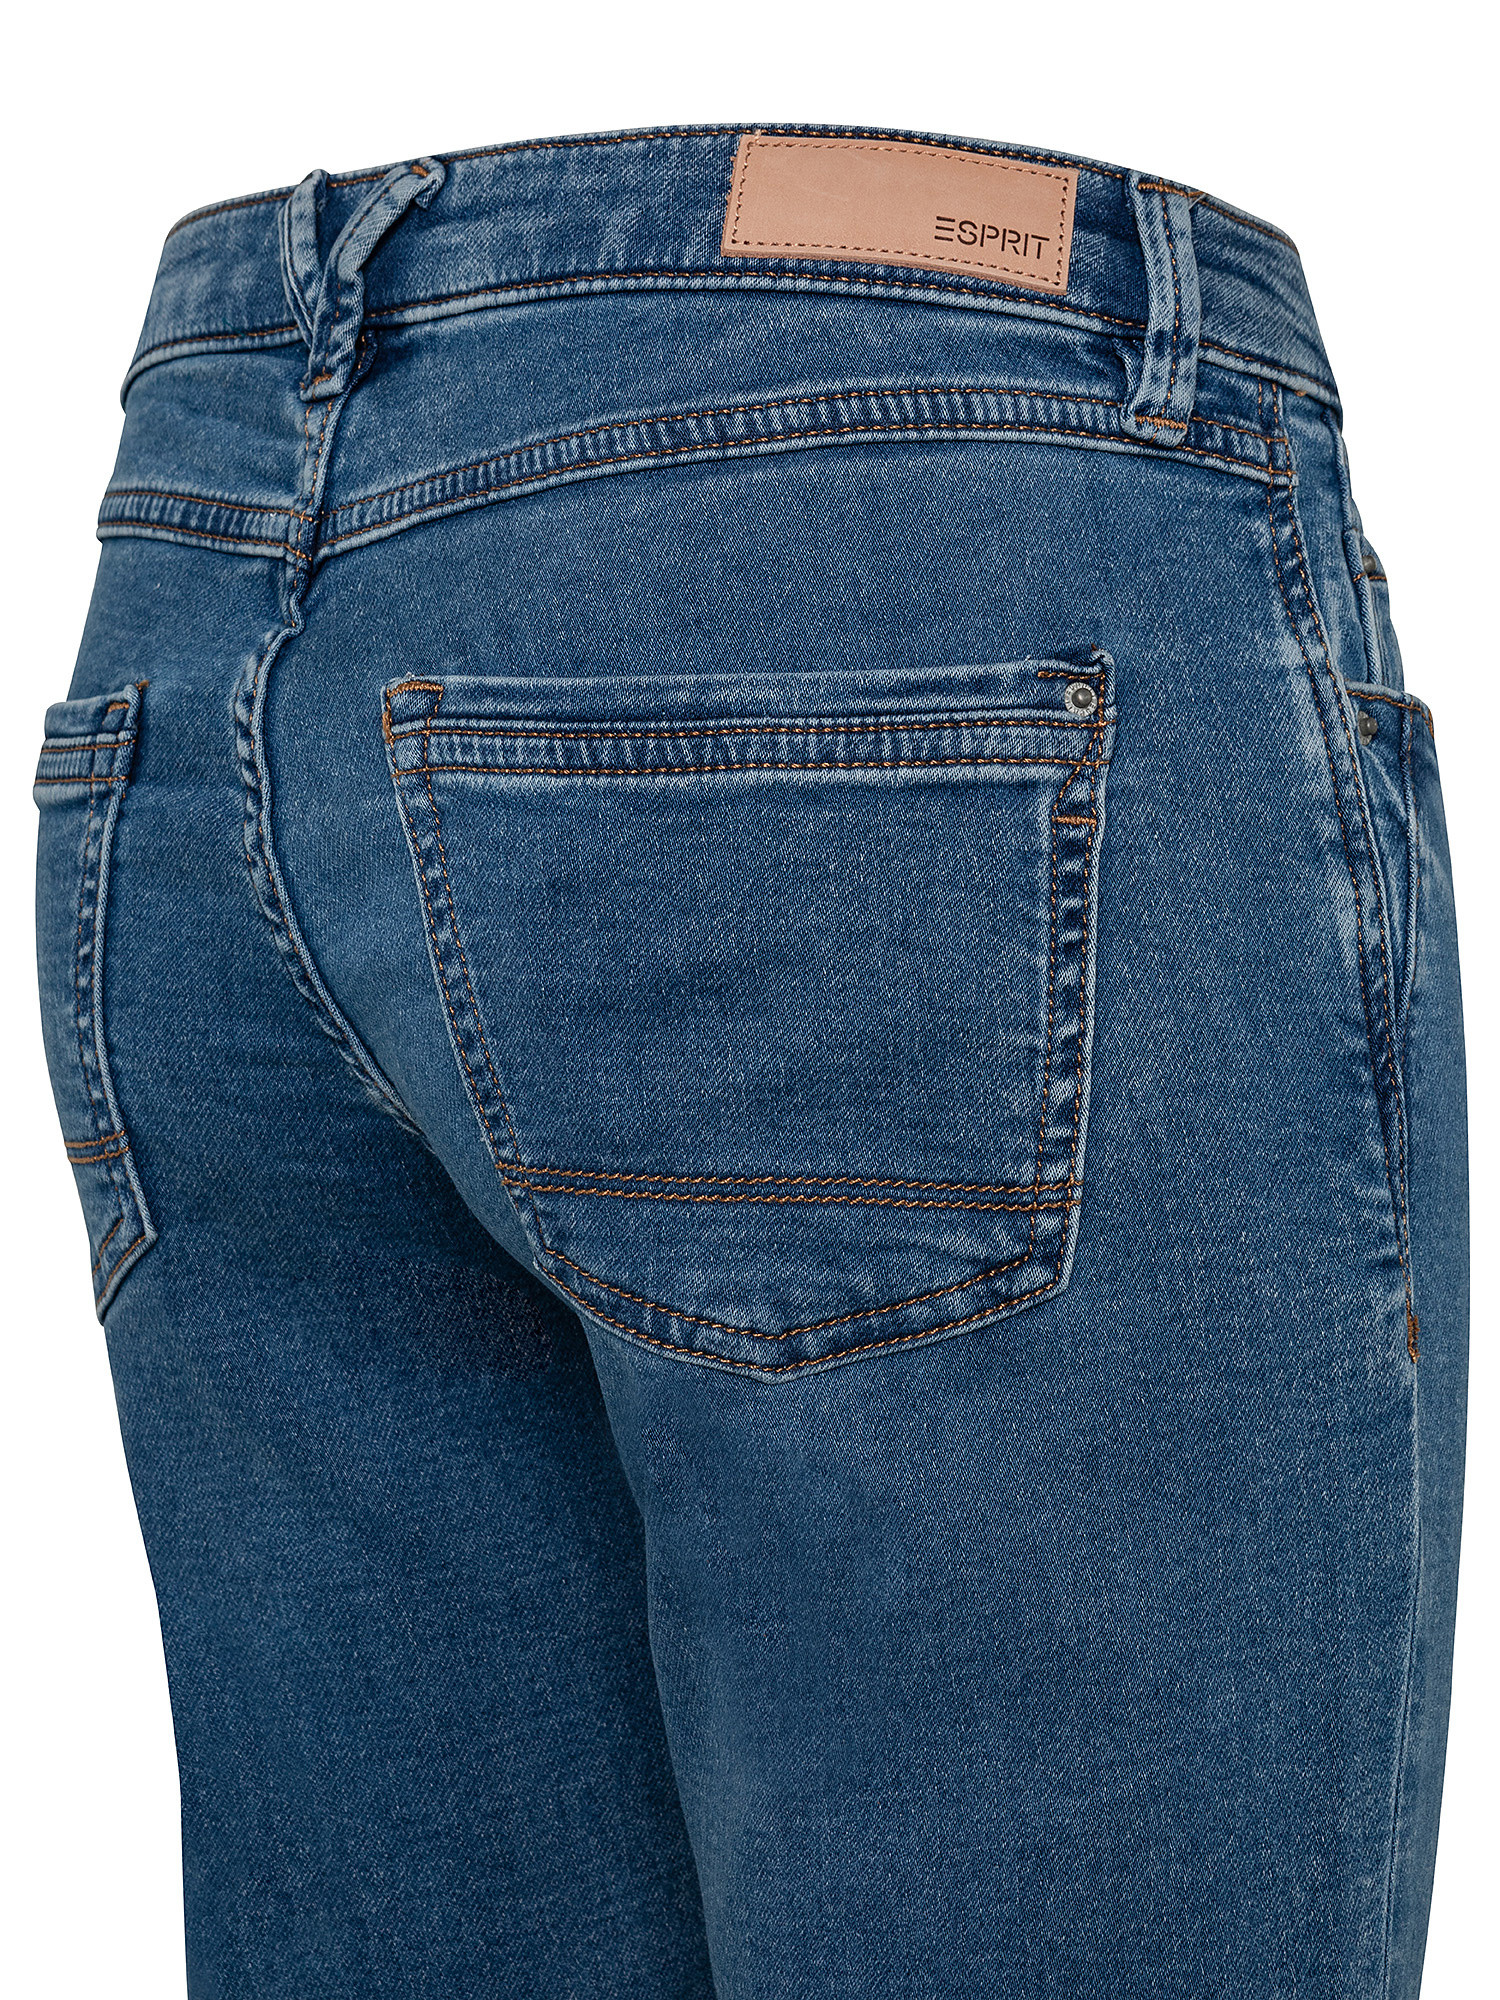 Jeans stretch in misto cotone biologico, Blu, large image number 2